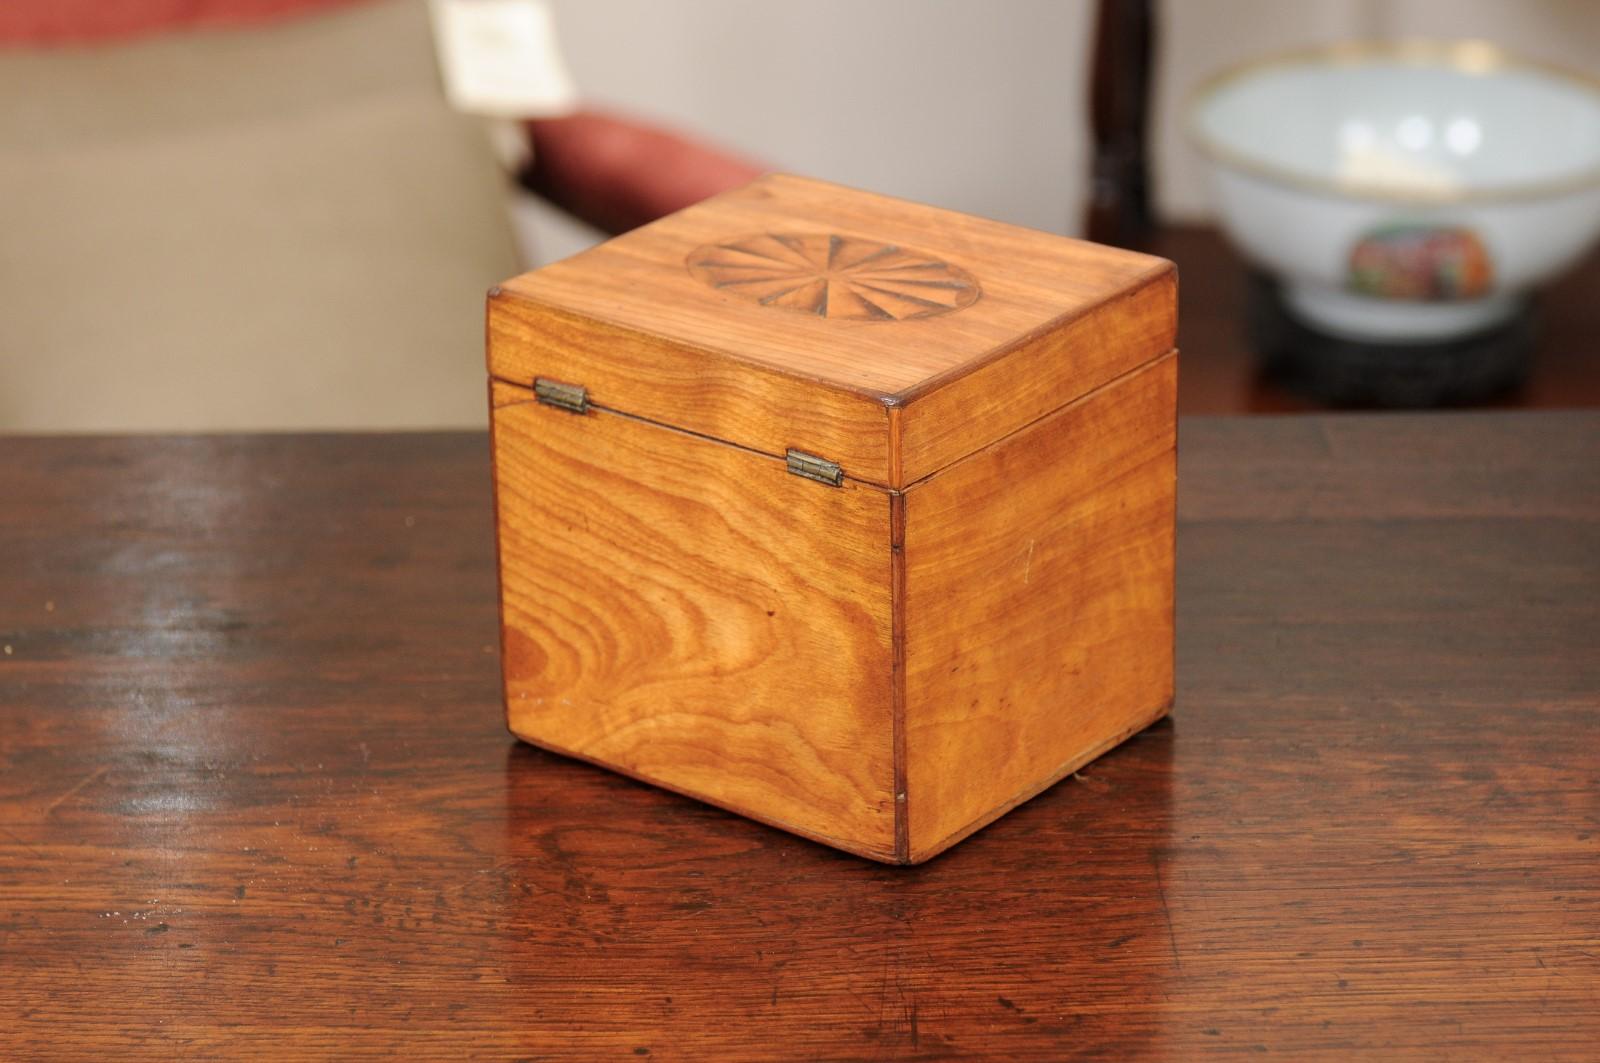 Late 18th Century English George III Mahogany Tea Caddy with Patera Inlay, ca. 1790 For Sale